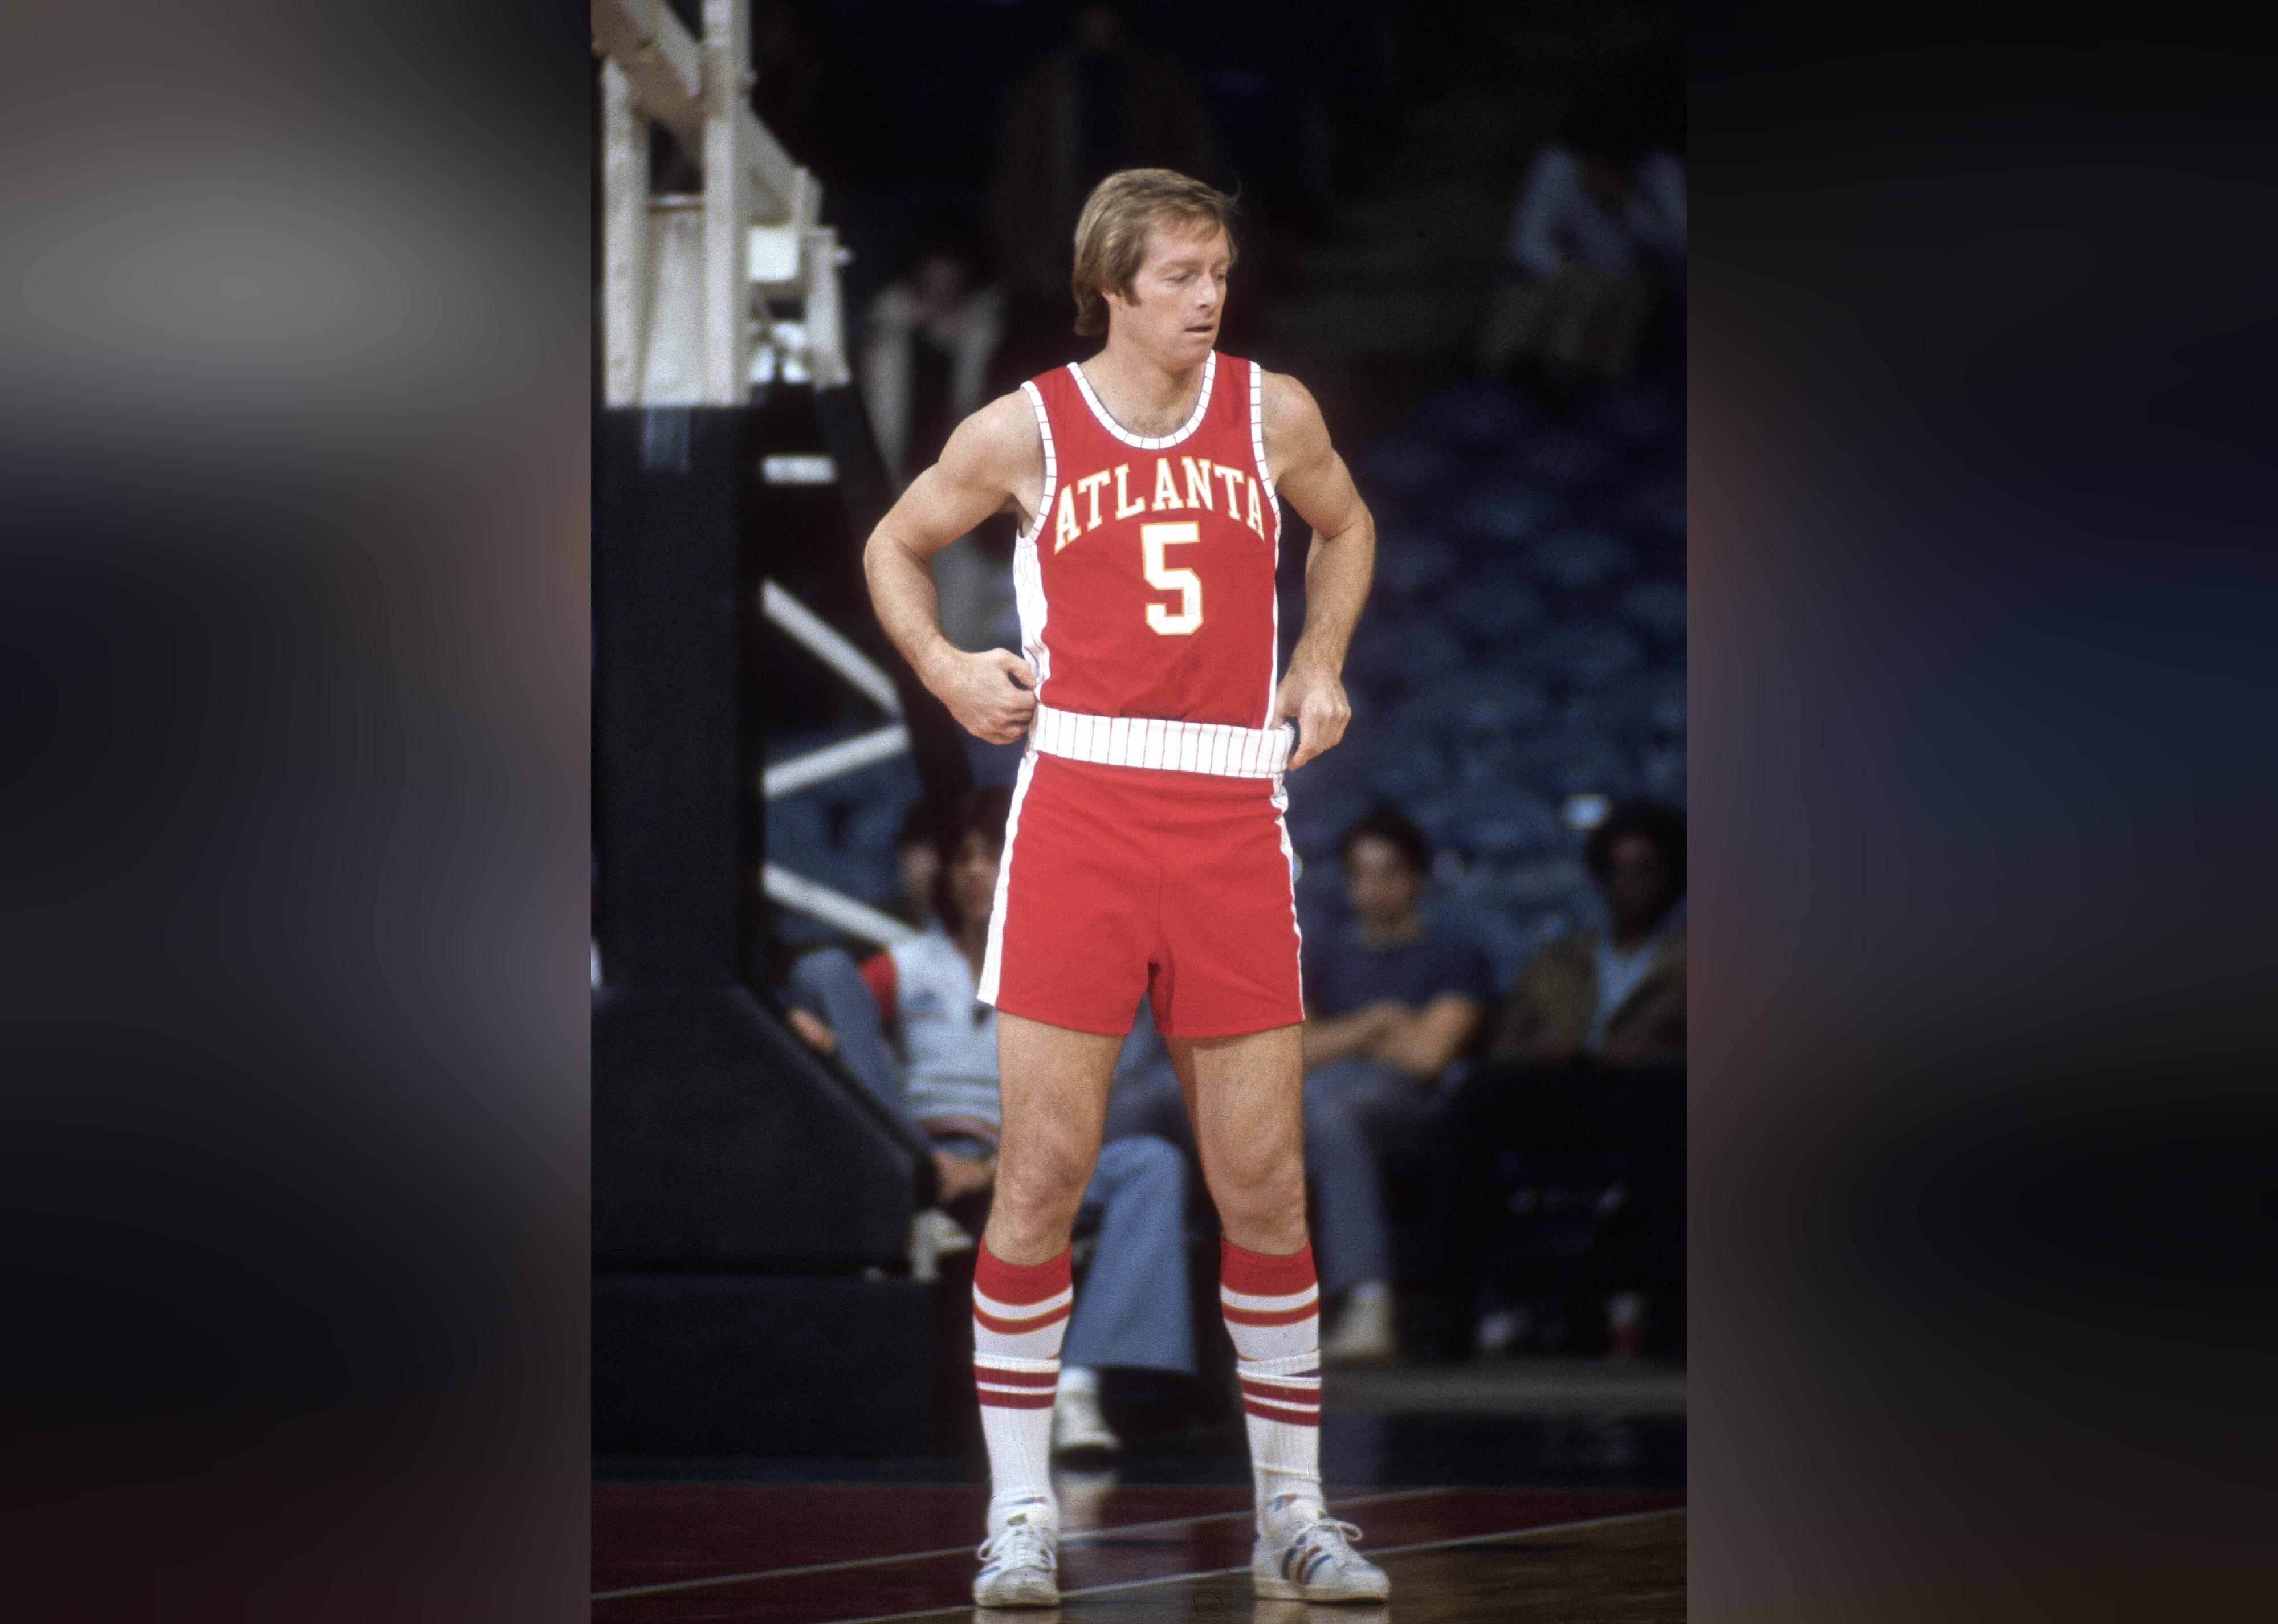 Tom Van Arsdale of the Atlanta Hawks looks on during a basketball game circa 1975.